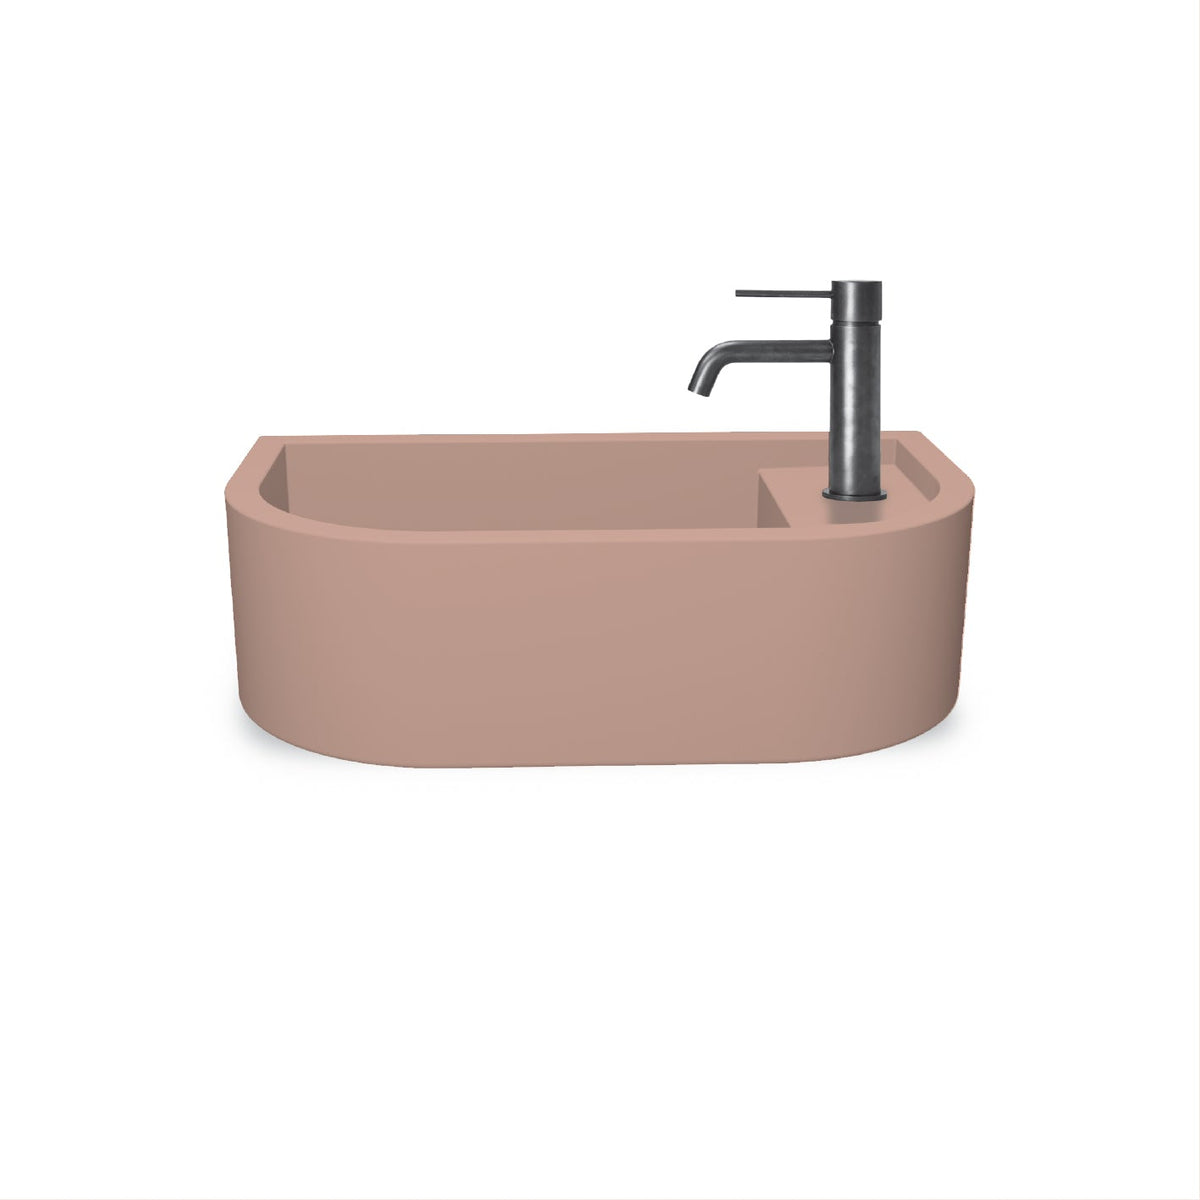 Loop 01 Basin - Overflow - Wall Hung (Blush Pink,Tap Hole,Chrome)